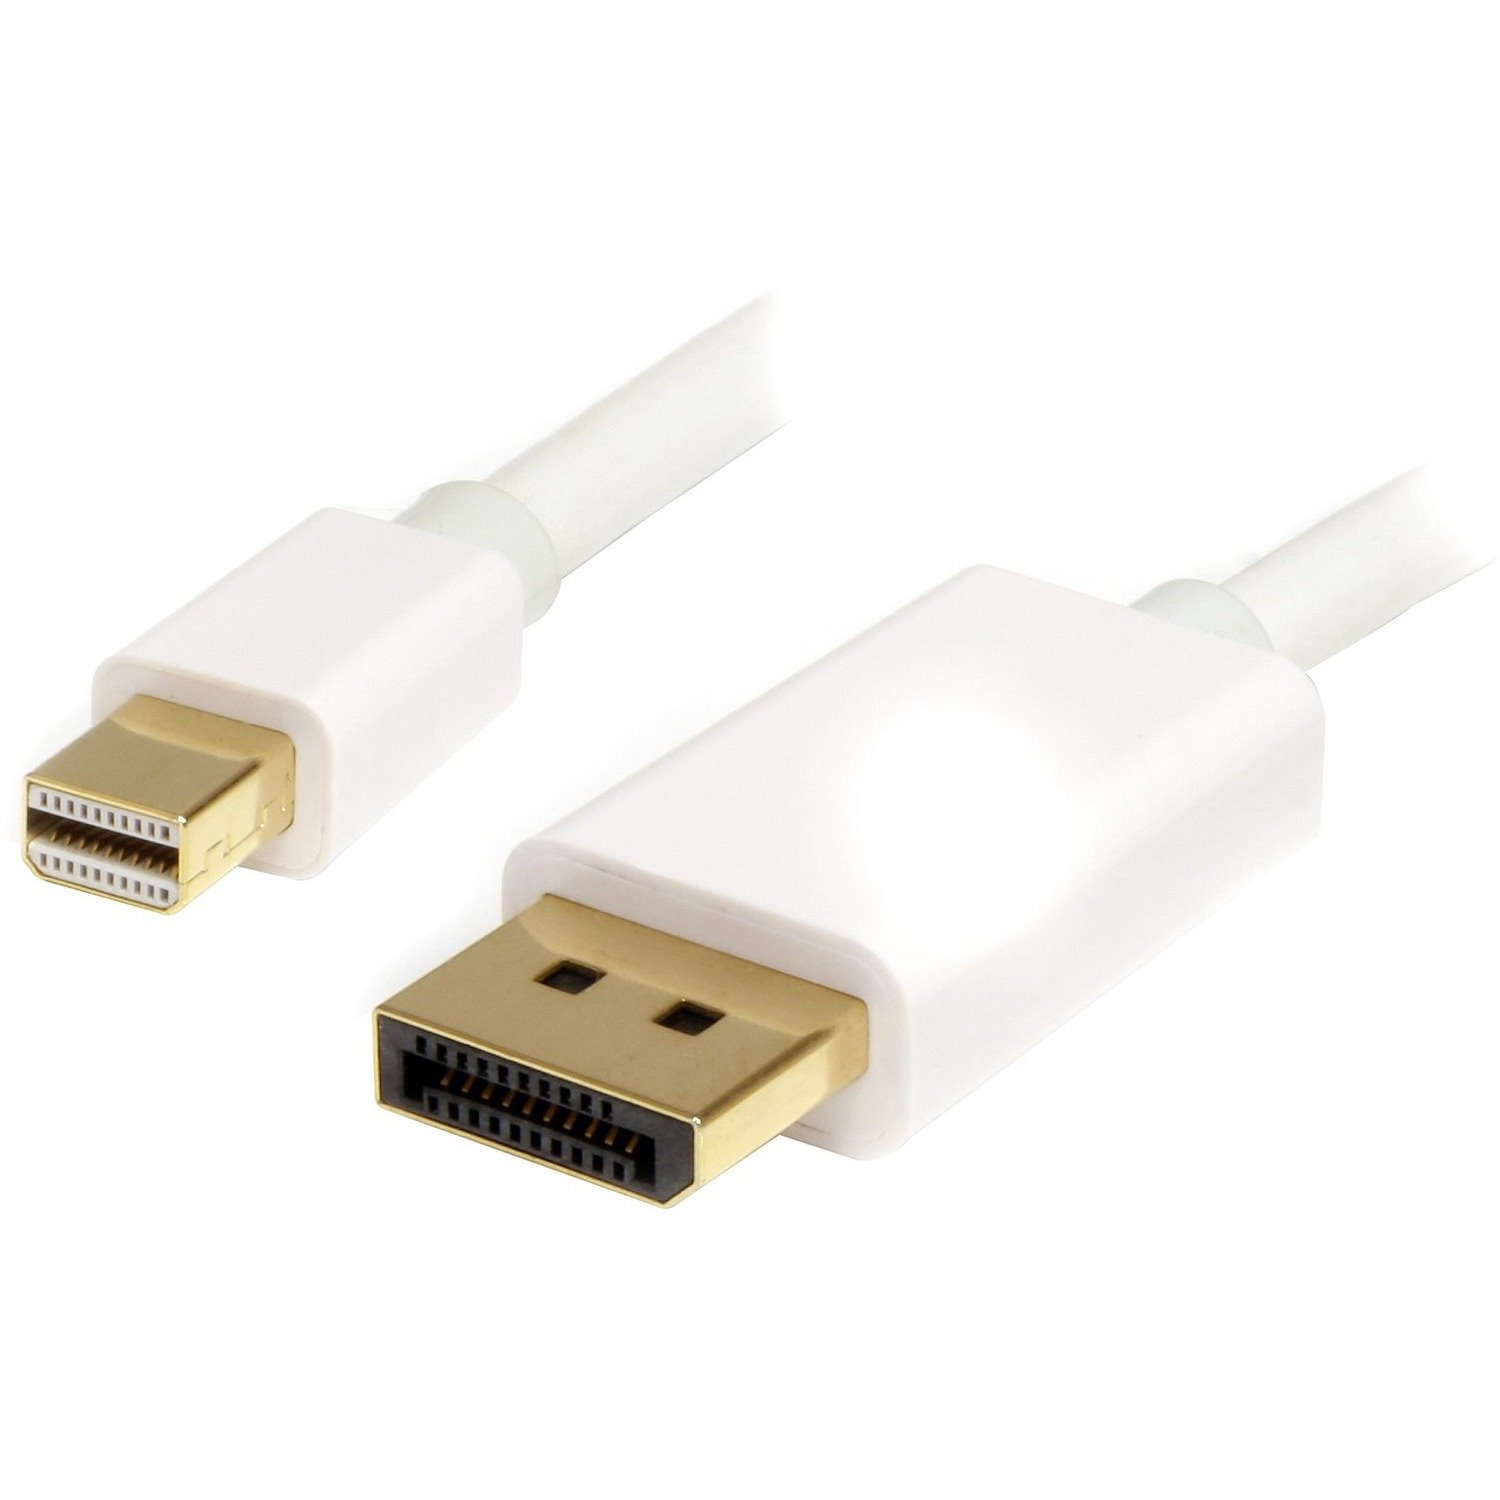 StarTech.com 3m (10ft) Mini DisplayPort to DisplayPort 1.2 Cable, 4K x 2K mDP to DisplayPort Adapter Cable, Mini DP to DP Cable